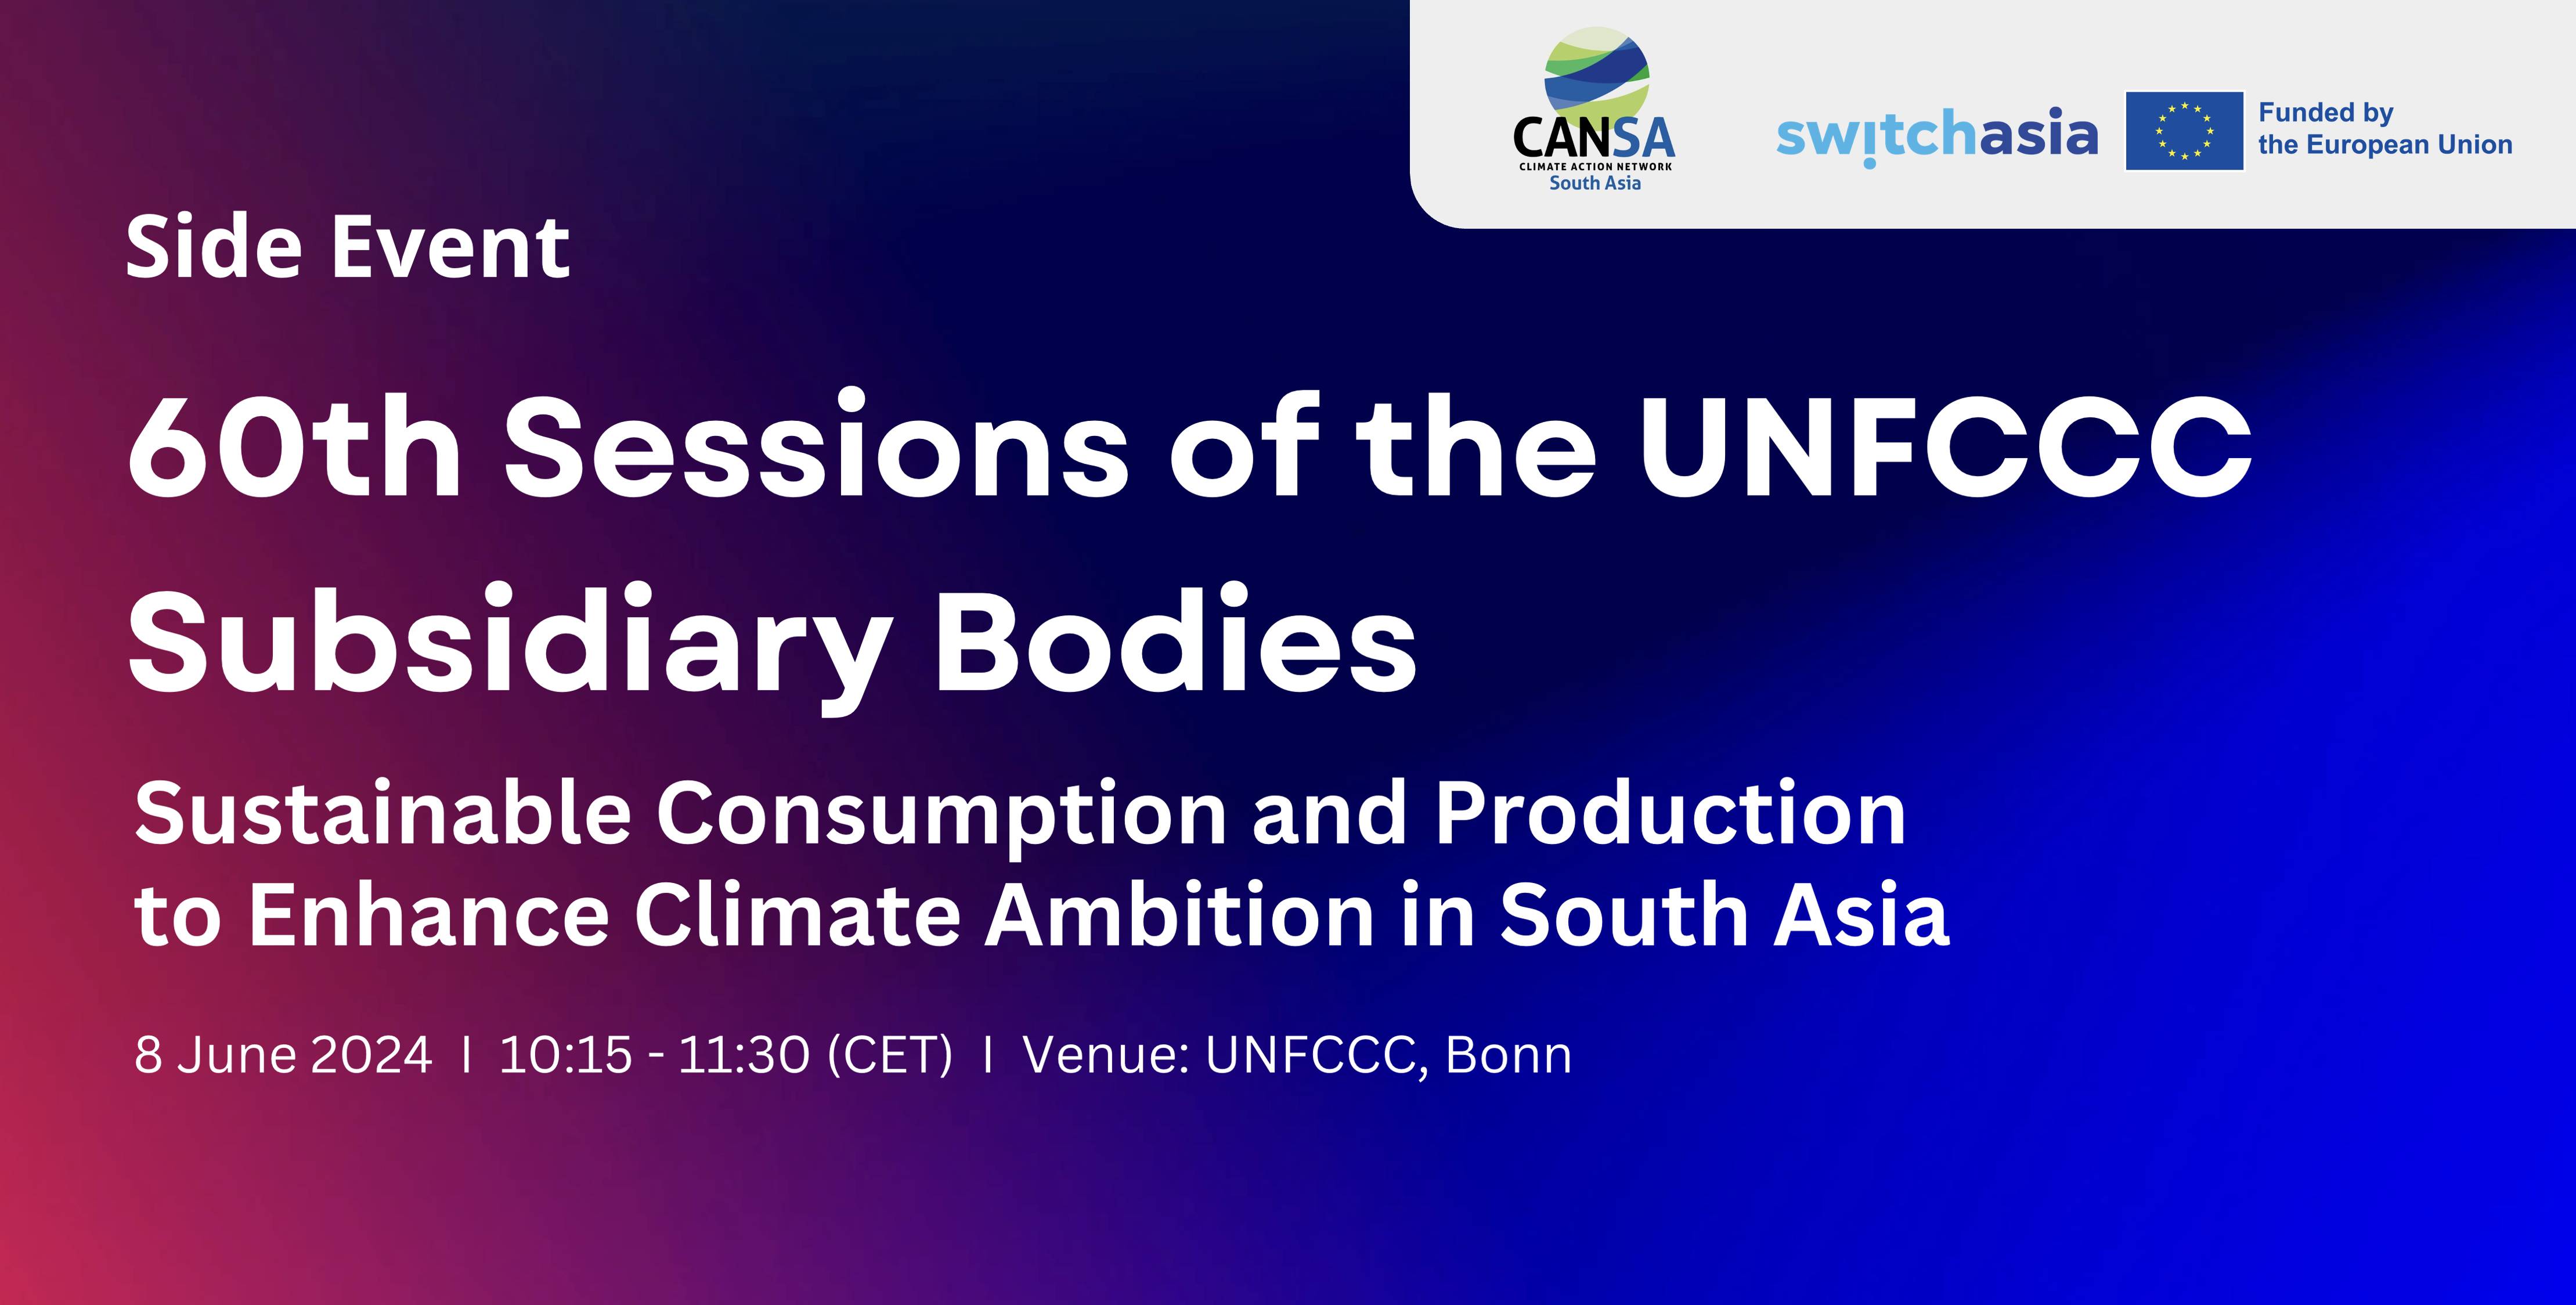 Side Event: 60th Sessions of the UNFCCC Subsidiary Bodies